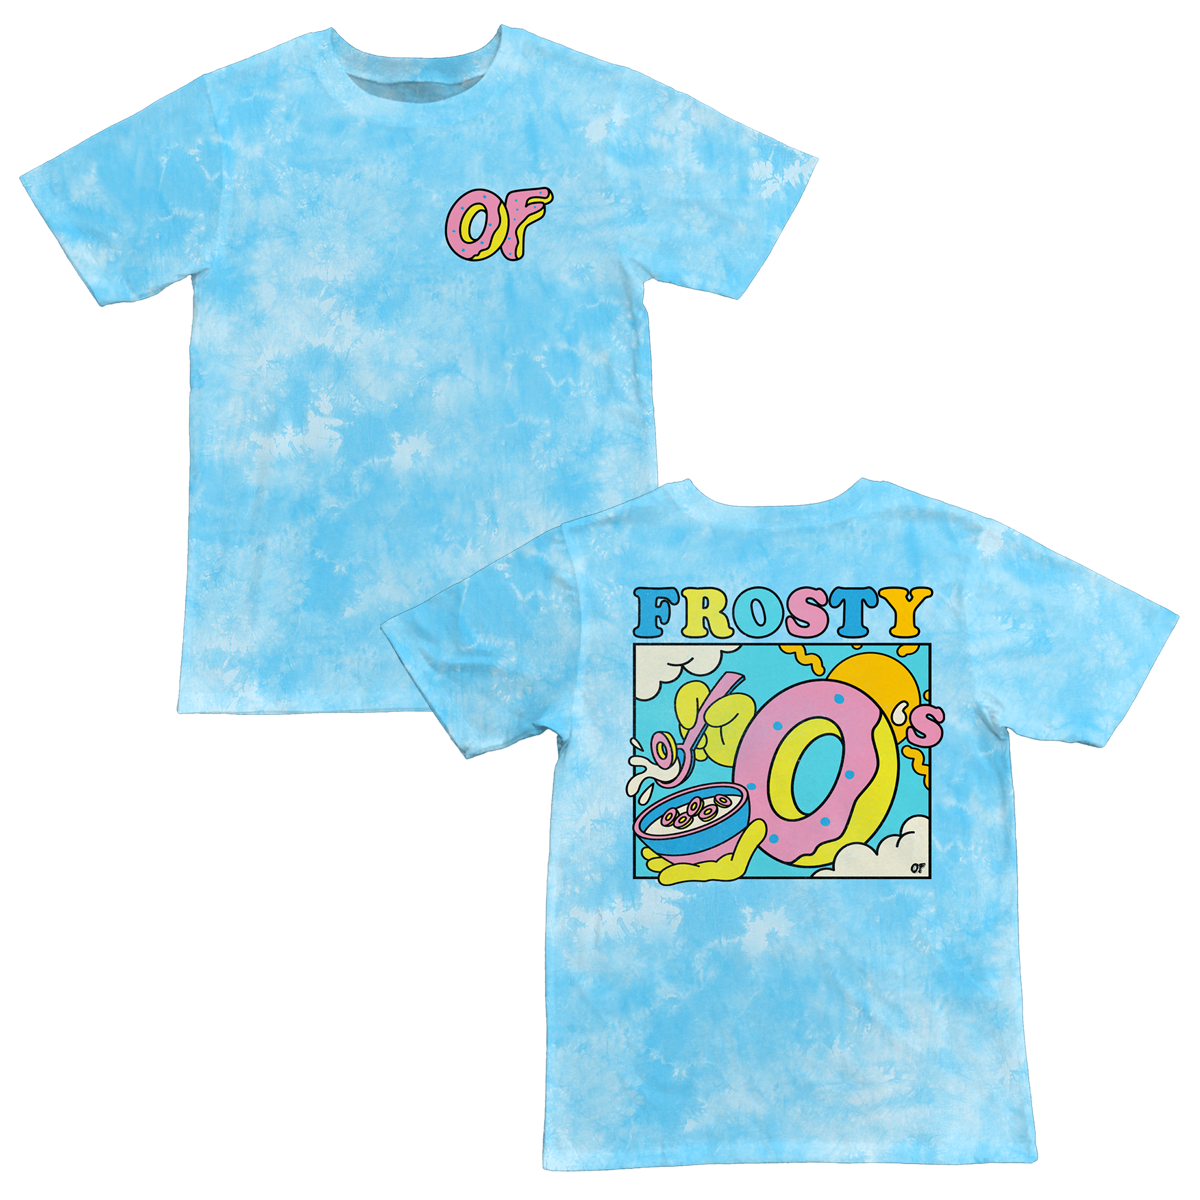 Frosty Cereal T-shirt - Turquoise Crystal Wash-Odd Future